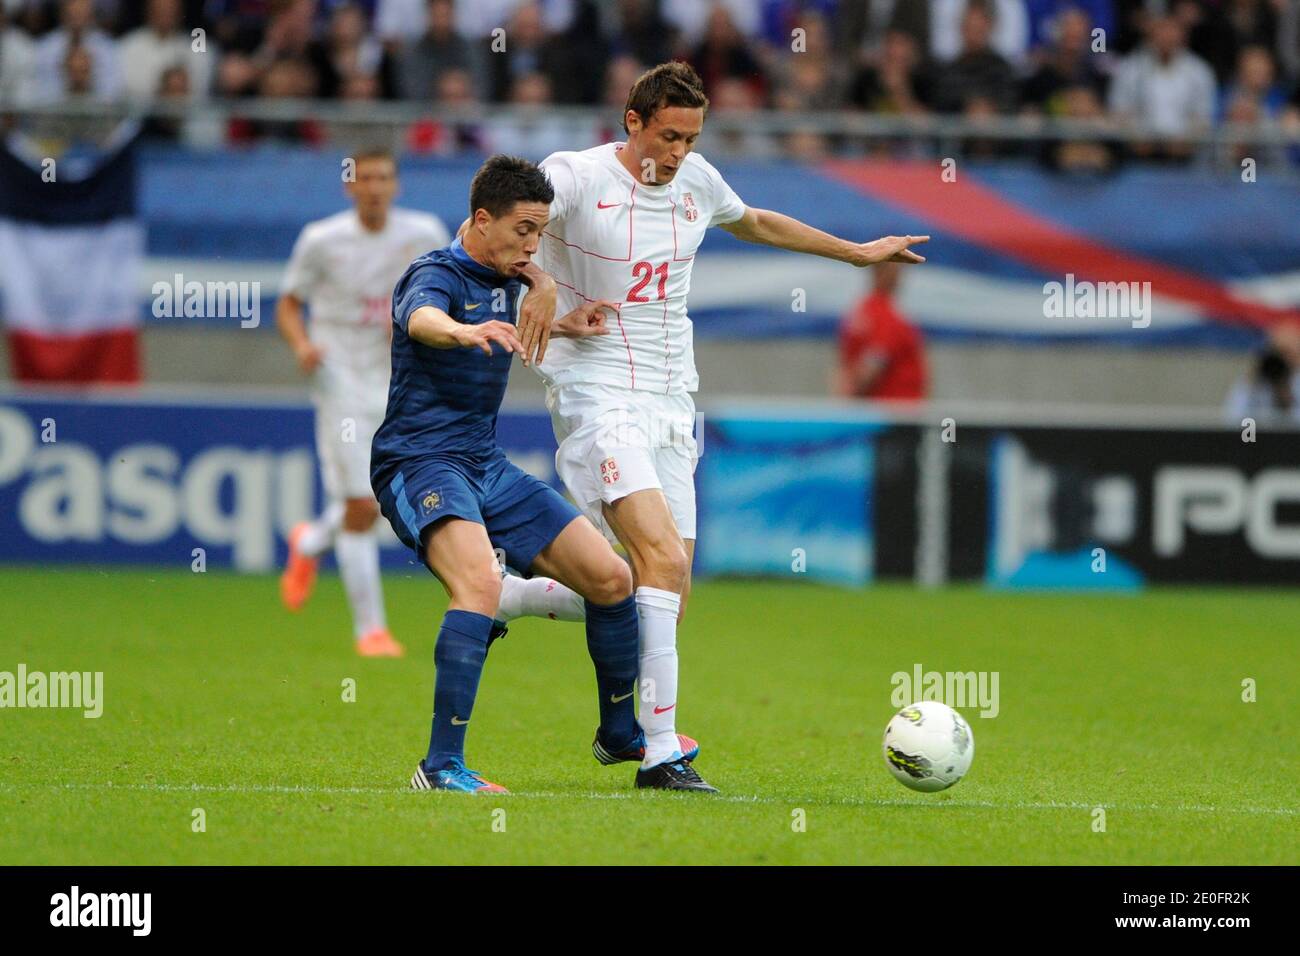 France's Samir Nasri battles for the ball with Serbia's Nemanja Matic during an International Friendly soccer match, France Vs Serbia at Auguste-Delaune stadium in Reims, France, on May 31, 2012. France won 2-0. Photo by Henri Szwarc/ABACAPRESS.COM Stock Photo